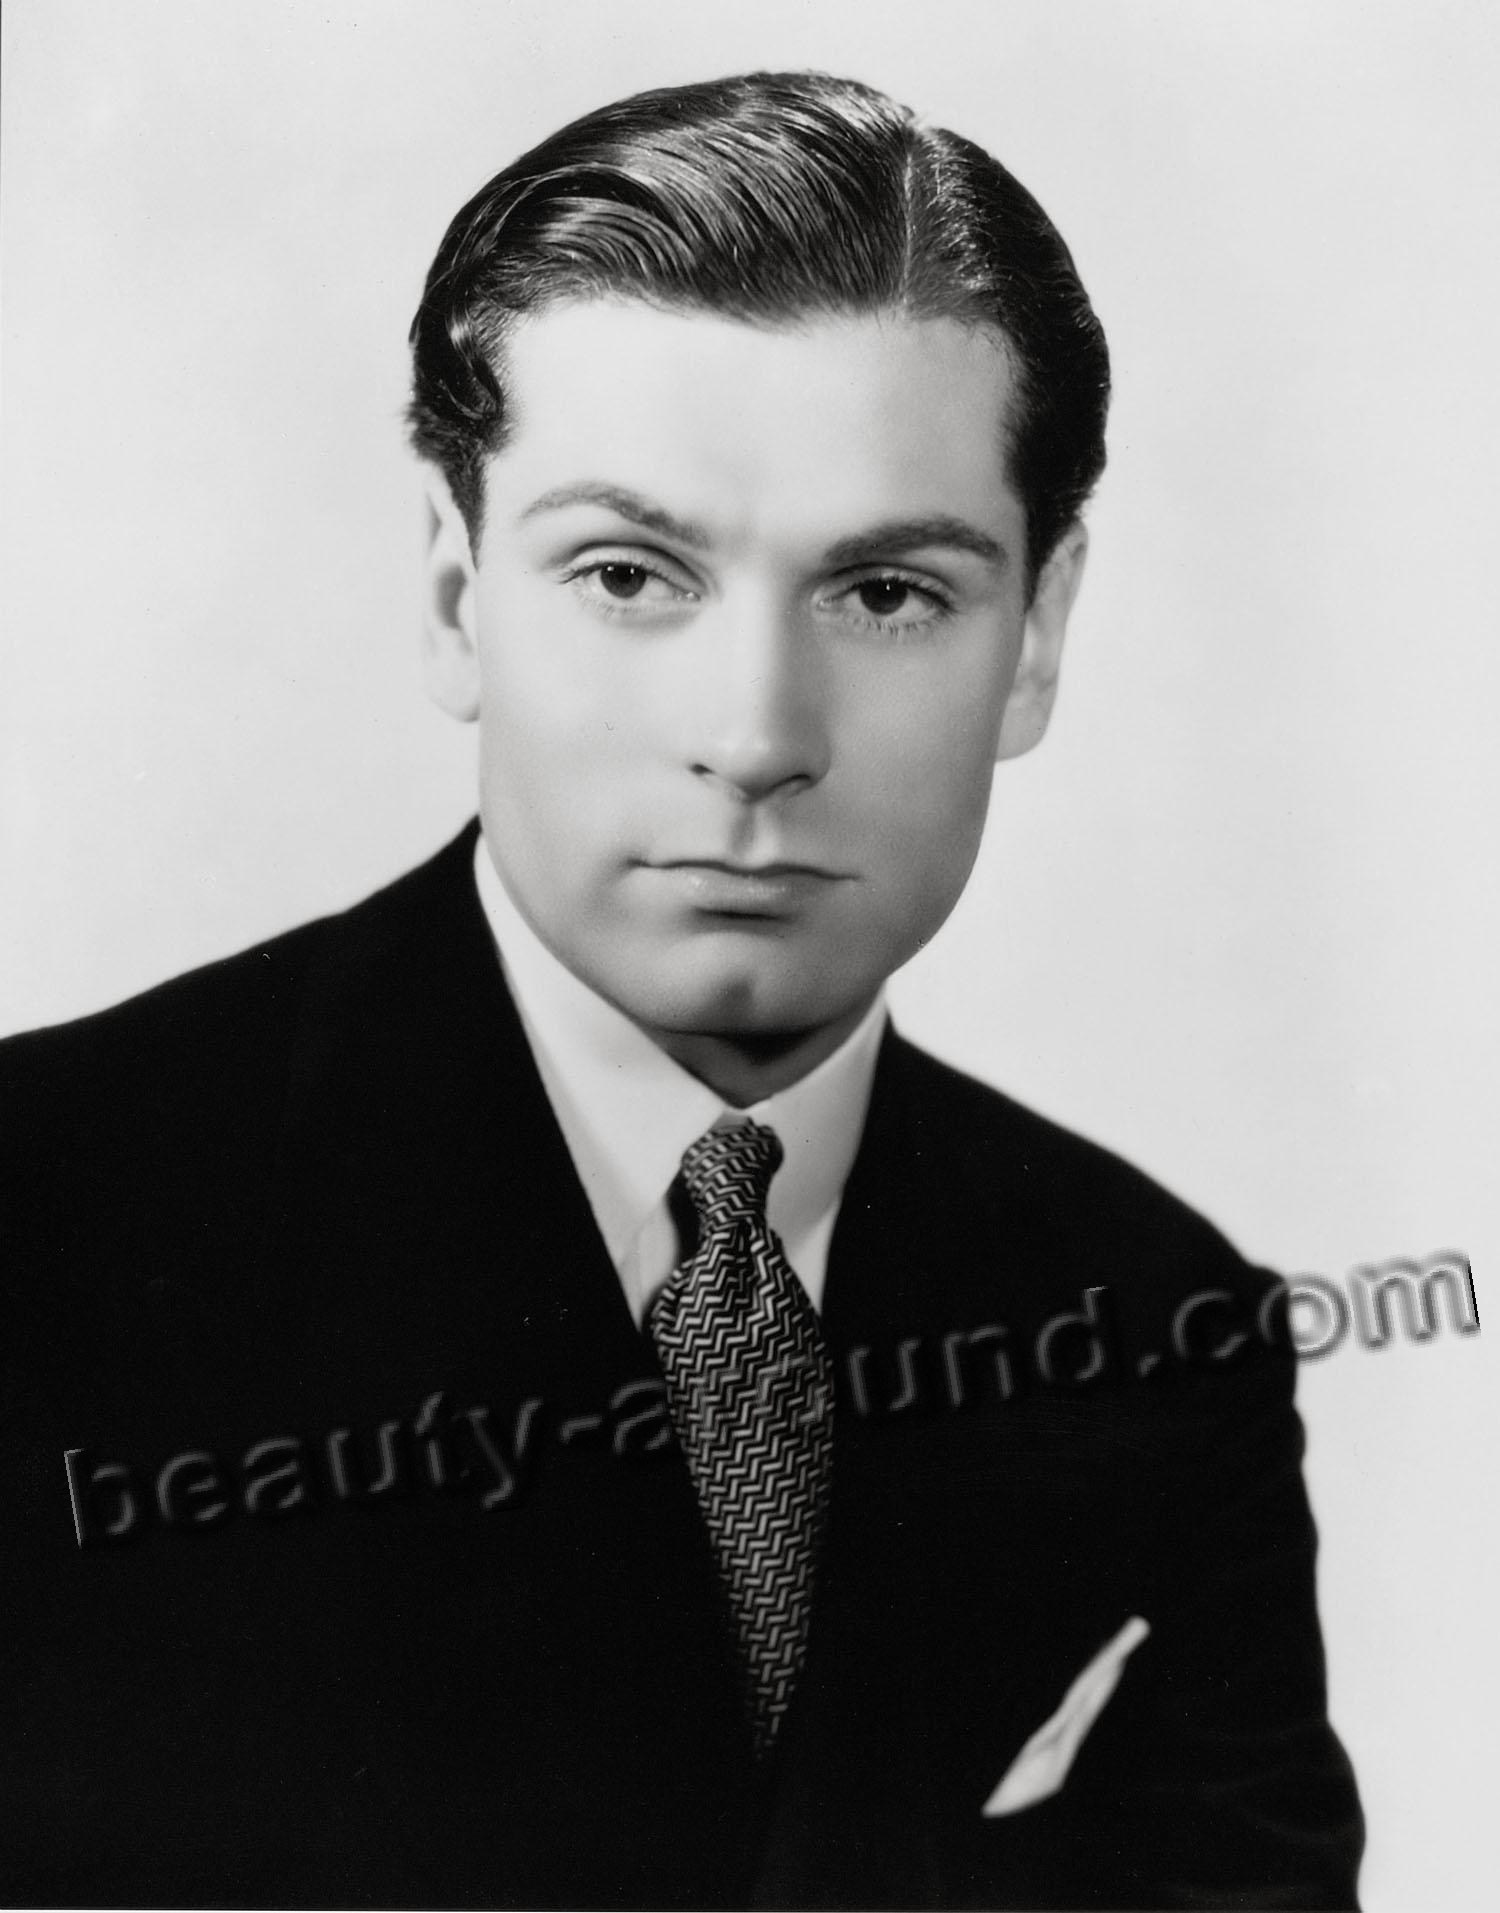 Laurence Olivier, British film and theater actor